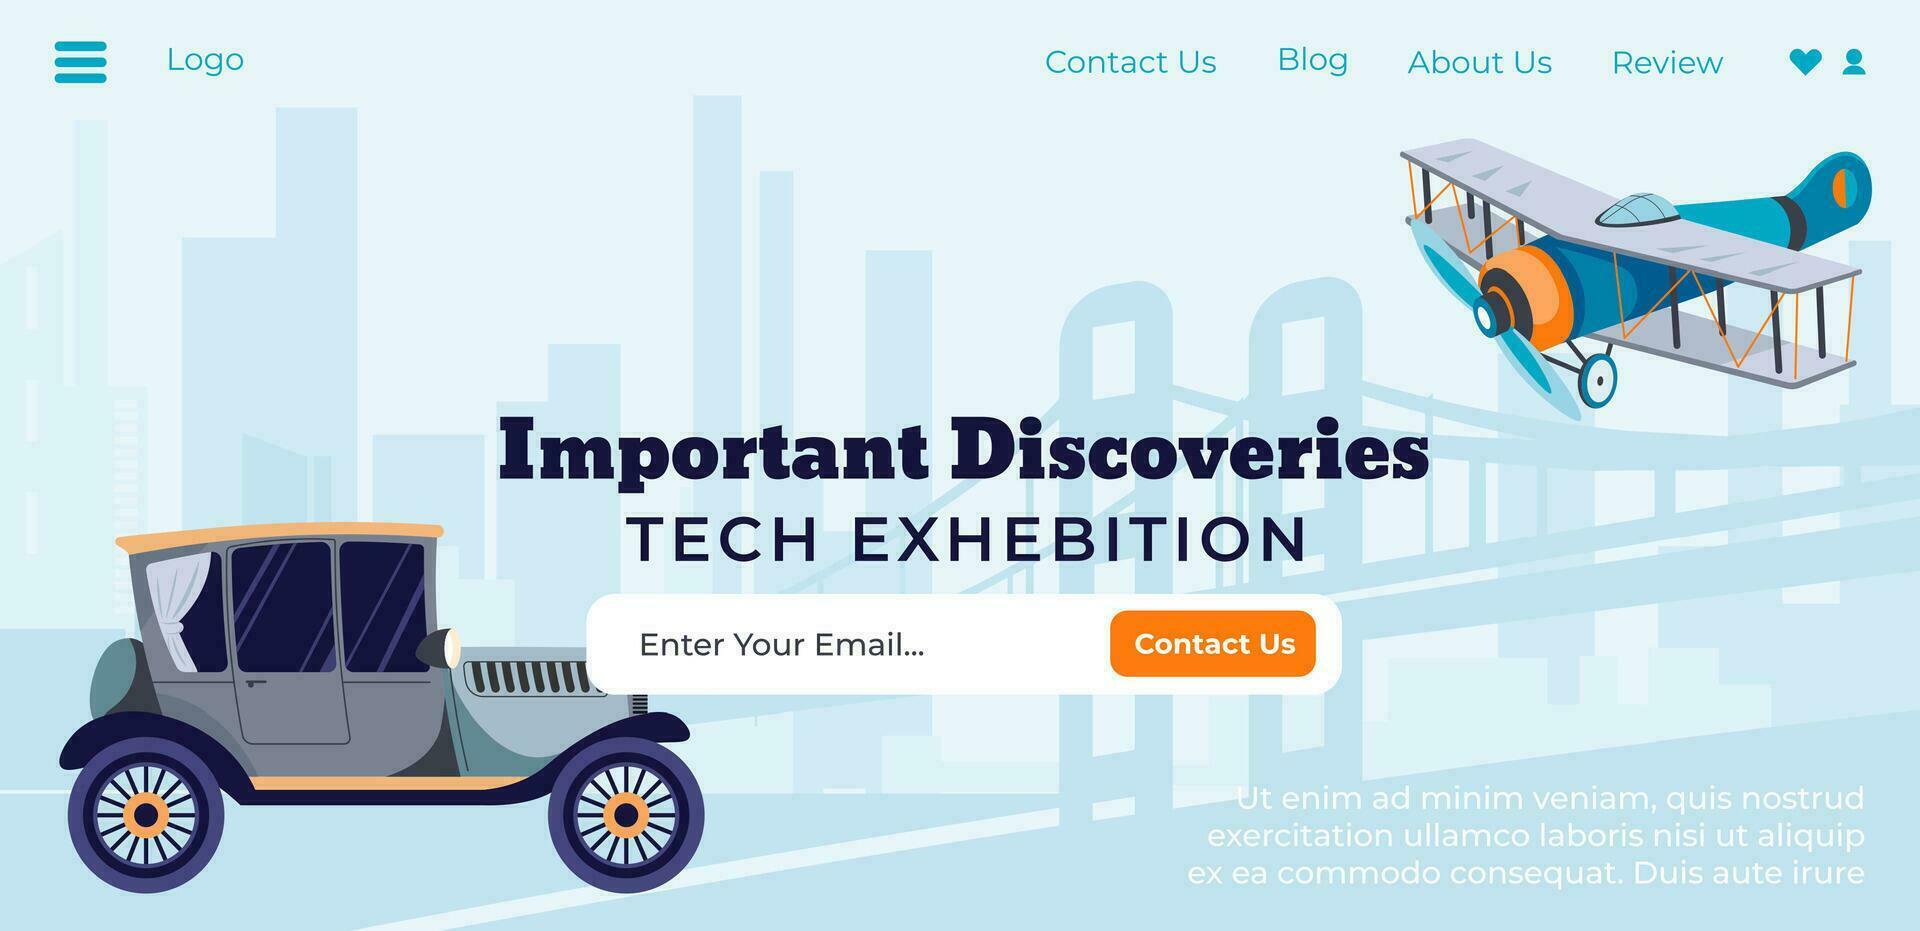 Technical exhibition of tech discoveries website vector